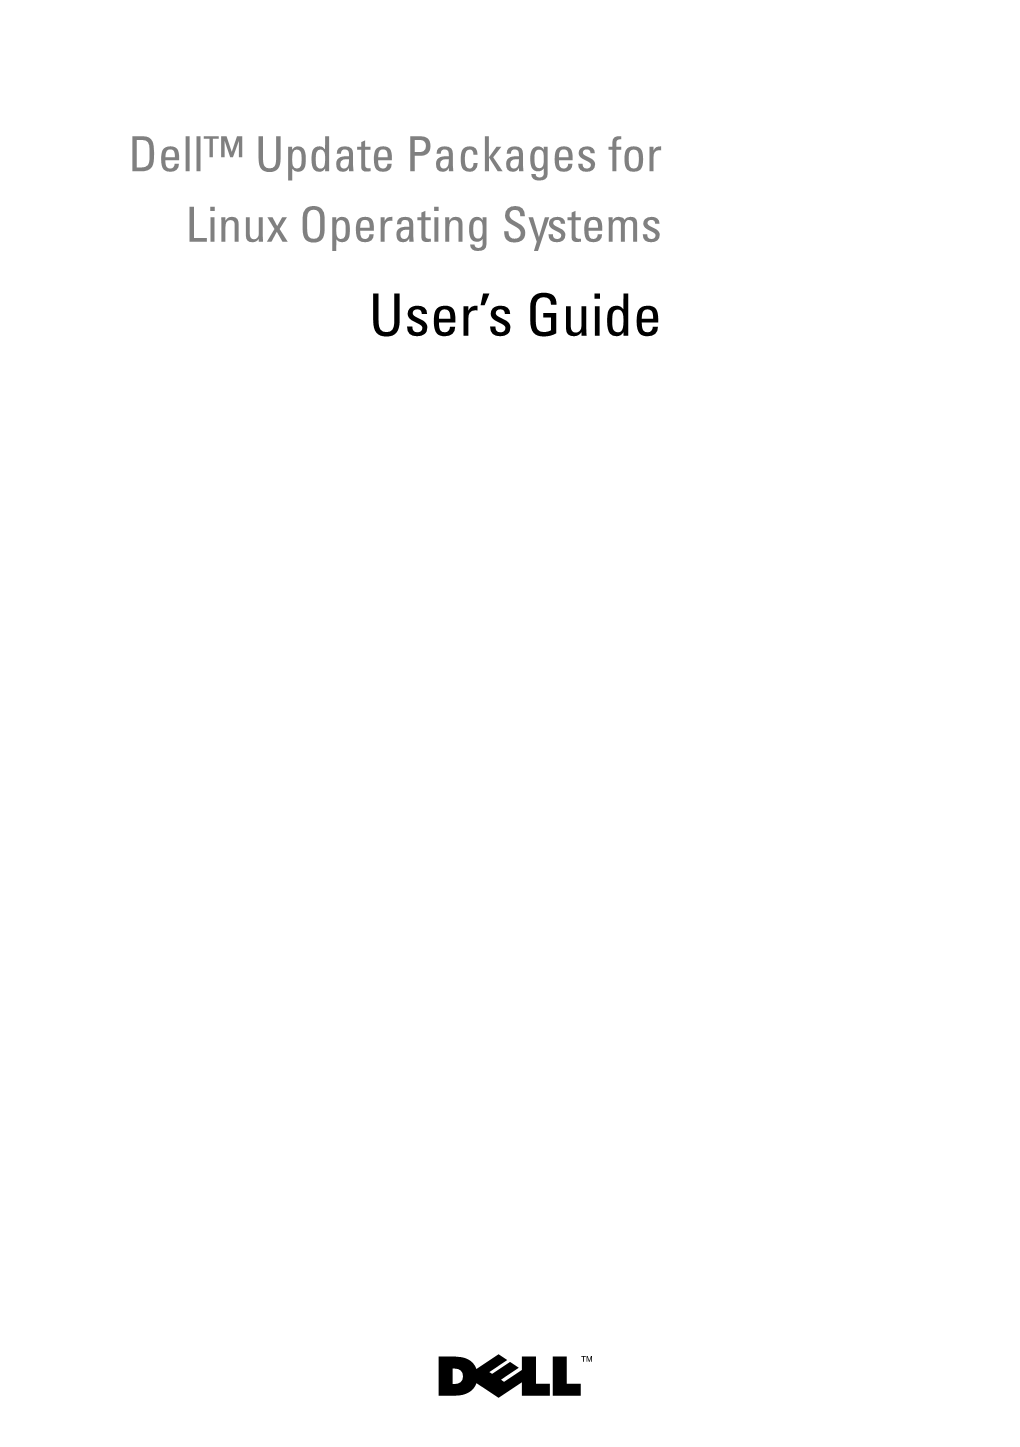 Dell Update Packages for Linux Operating Systems User's Guide